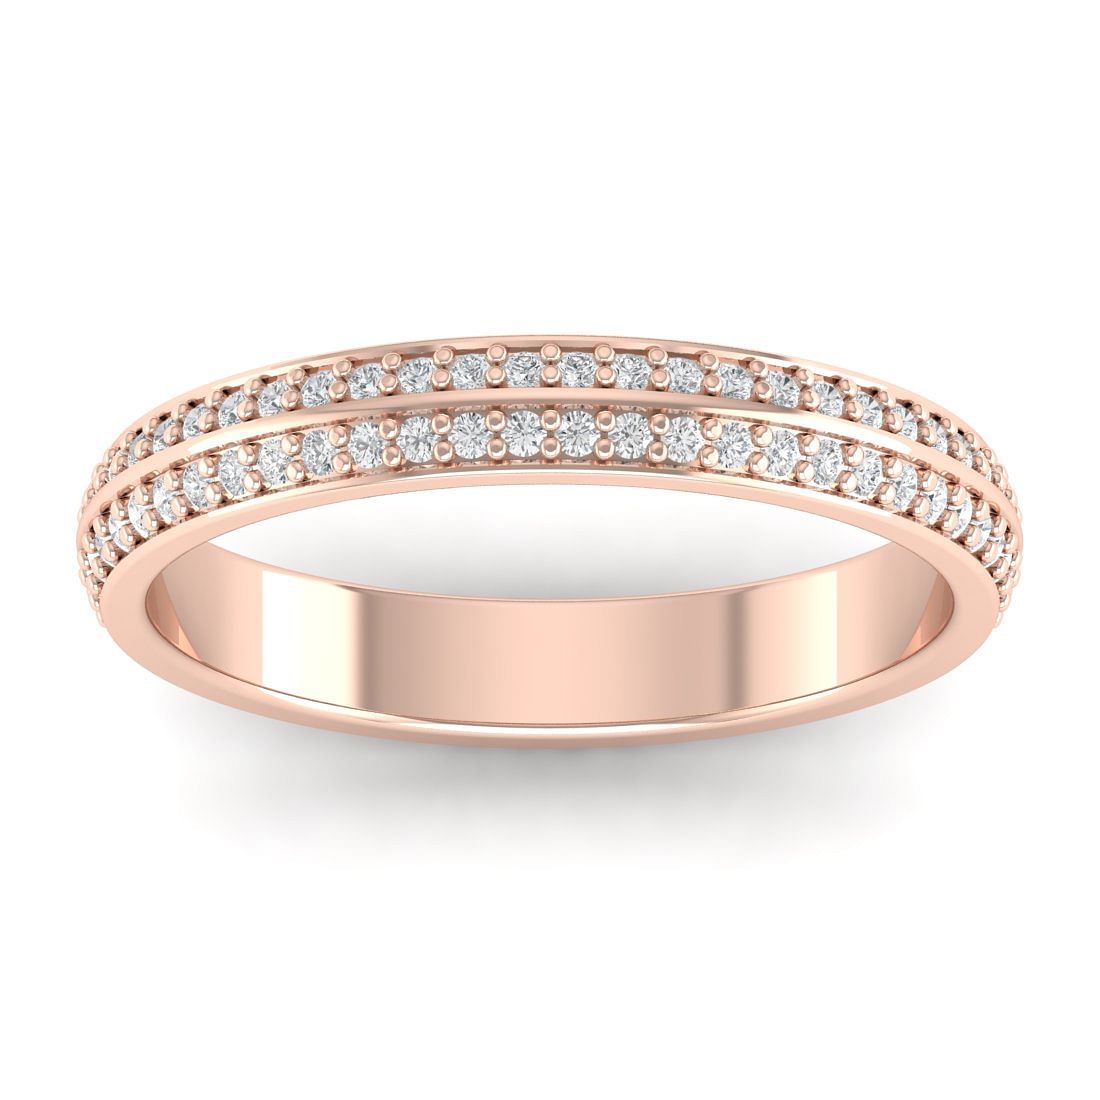 Double Diamond Rose Gold Wedding Ring Band For Women